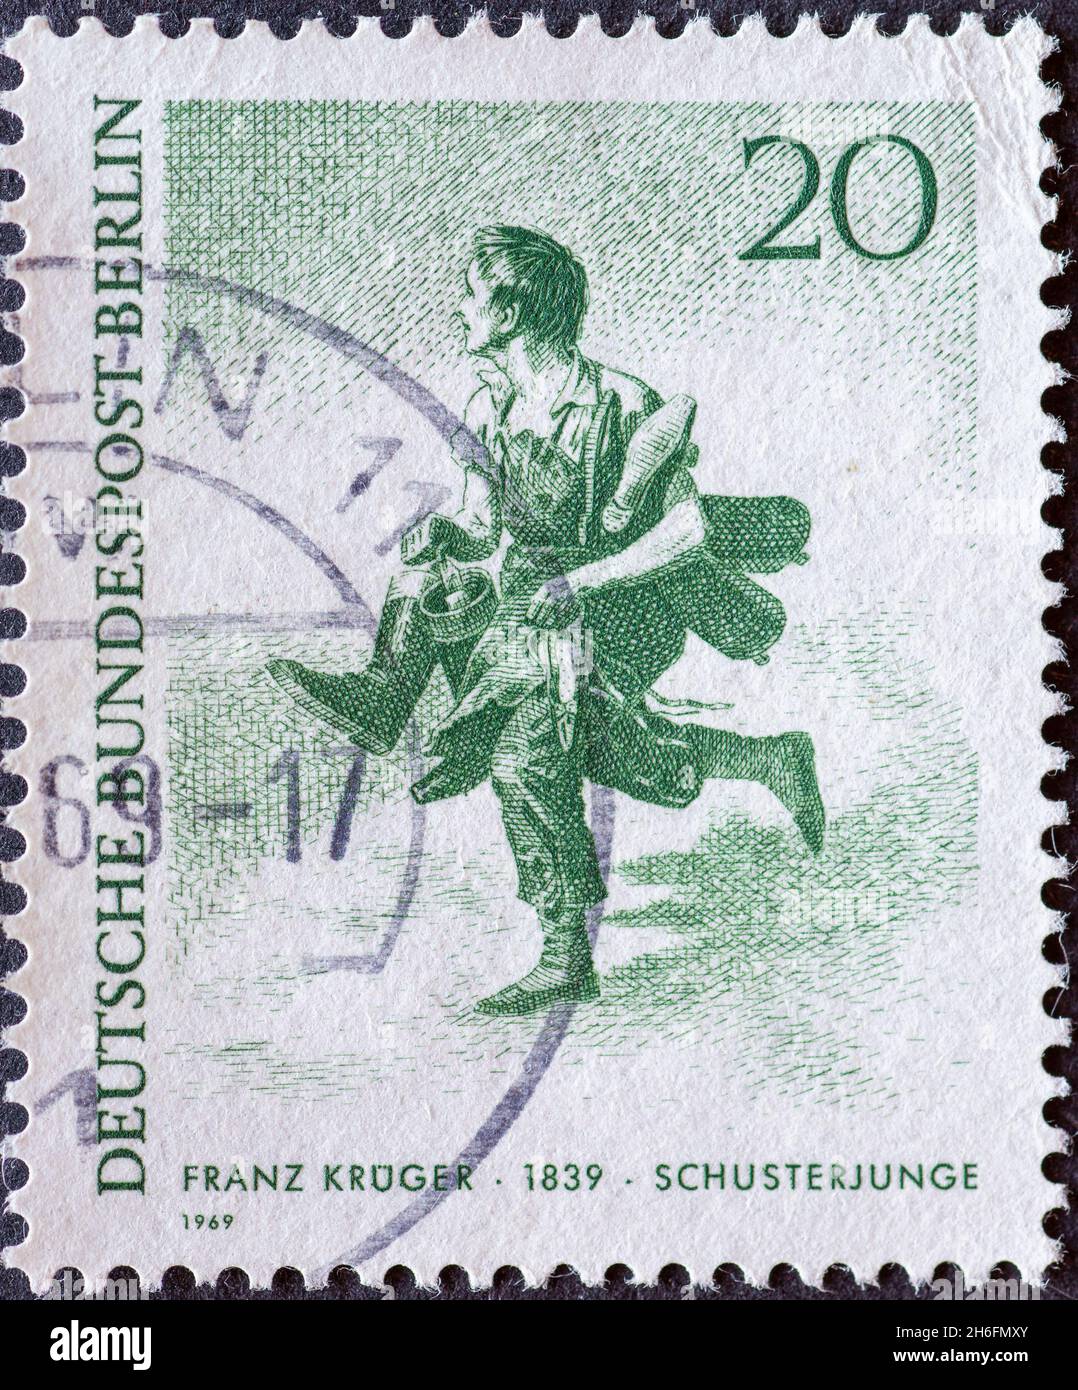 GERMANY, Berlin - CIRCA 1969: a postage stamp from Germany, Berlin showing 19th century Berliners.  Franz Krüger shoemaker boy Stock Photo